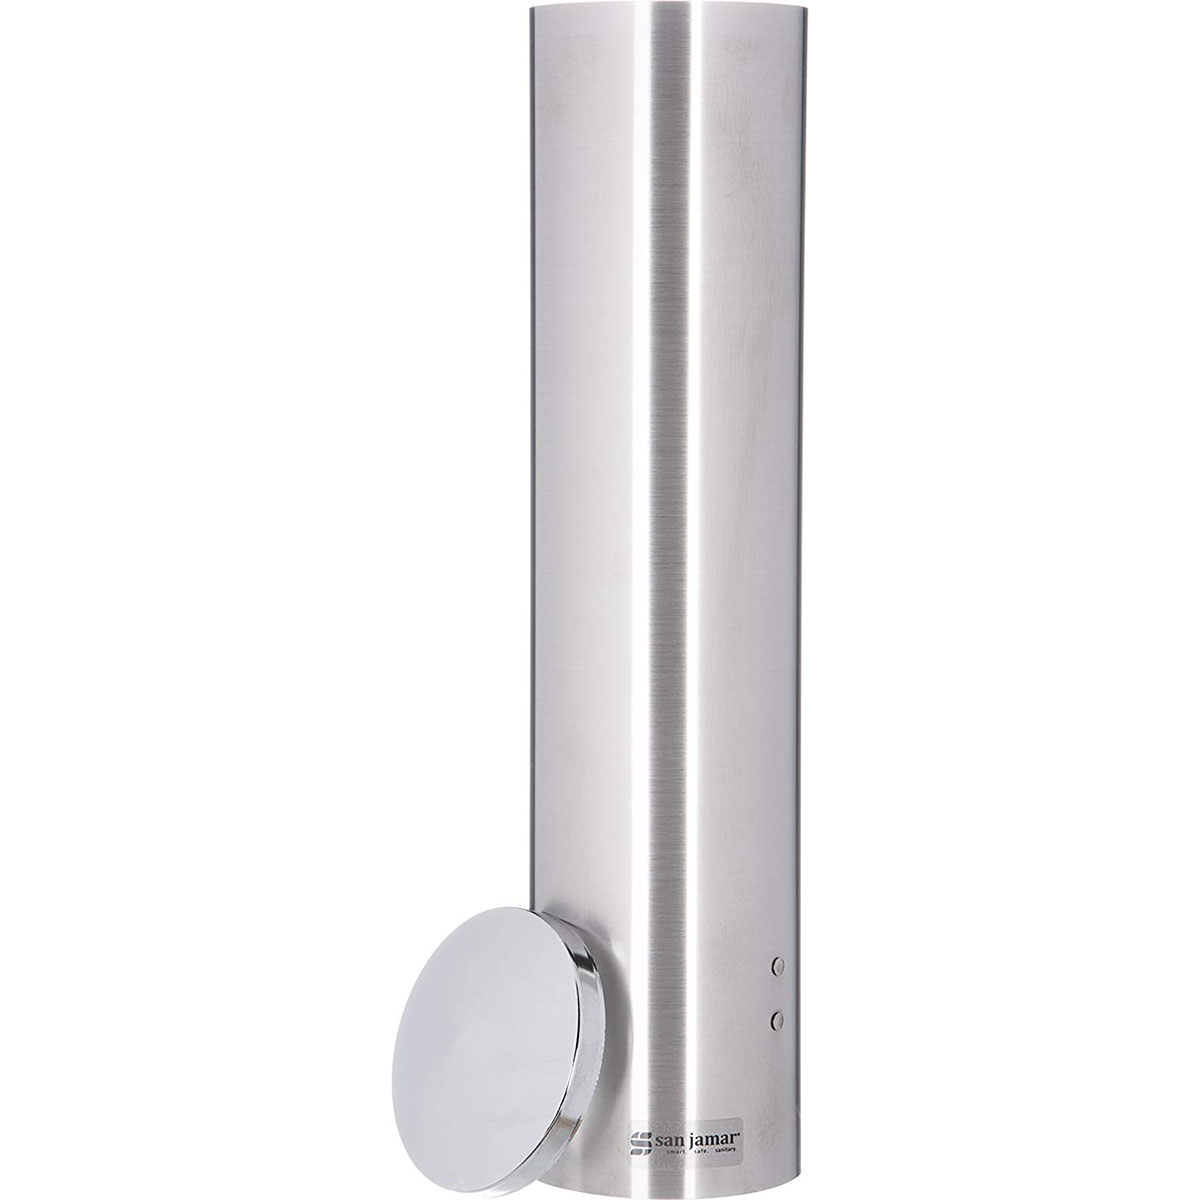 San Jamar C3250SS Stainless Steel Large Pull Type Water Cup Dispenser image 1